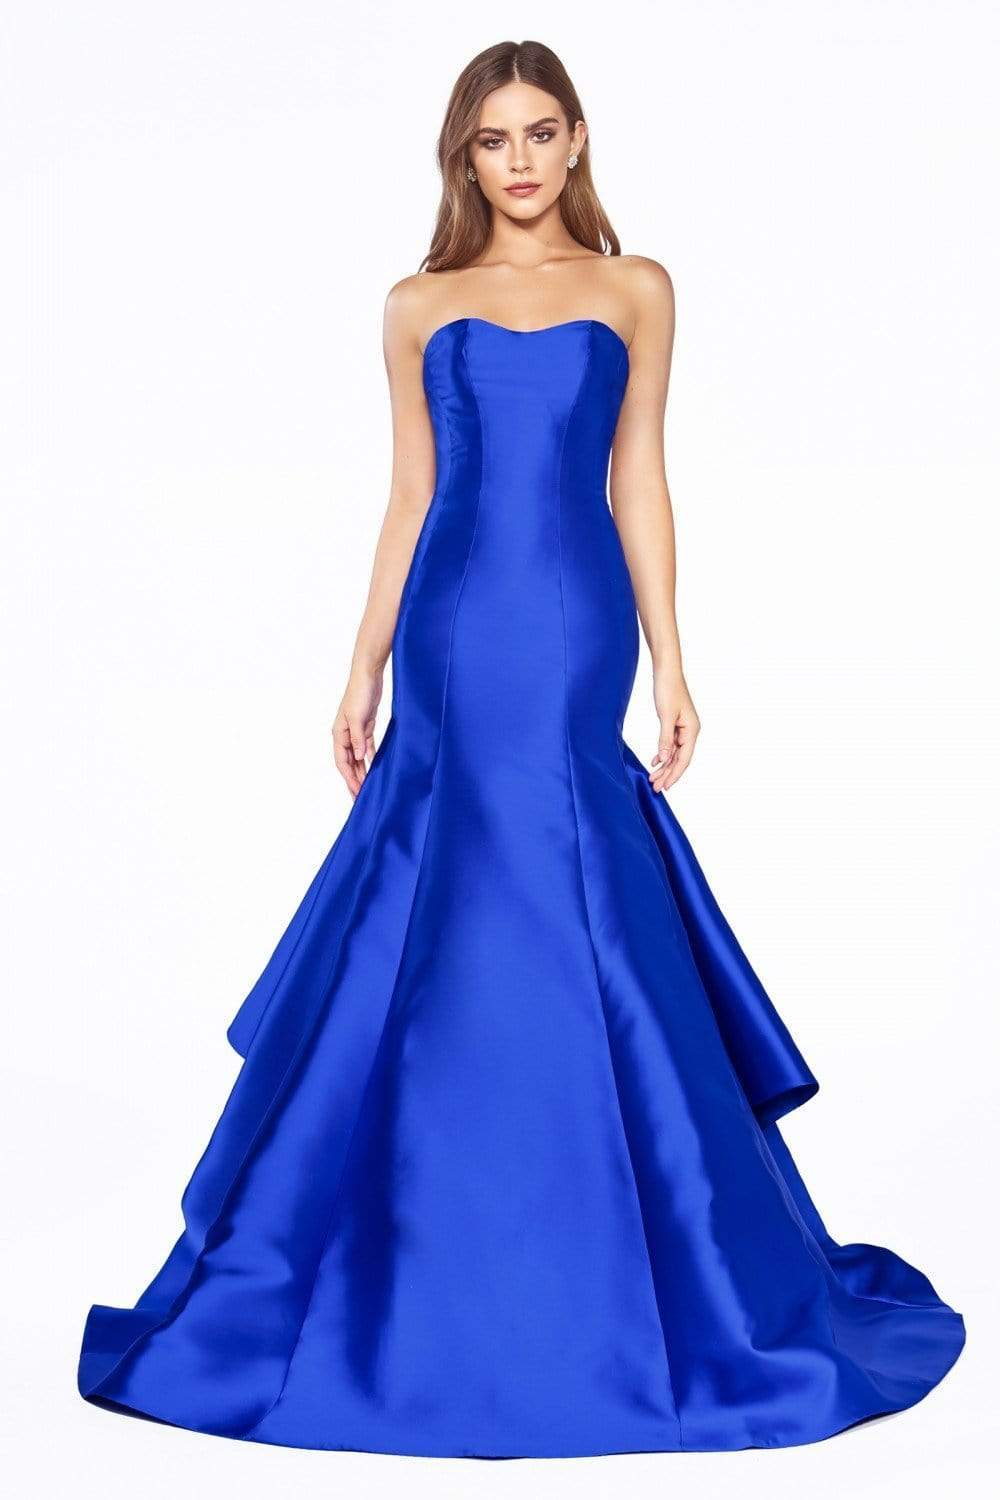 Cinderella Divine - Strapless Sweetheart Layered Trumpet Dress Special Occasion Dress 2 / Royal